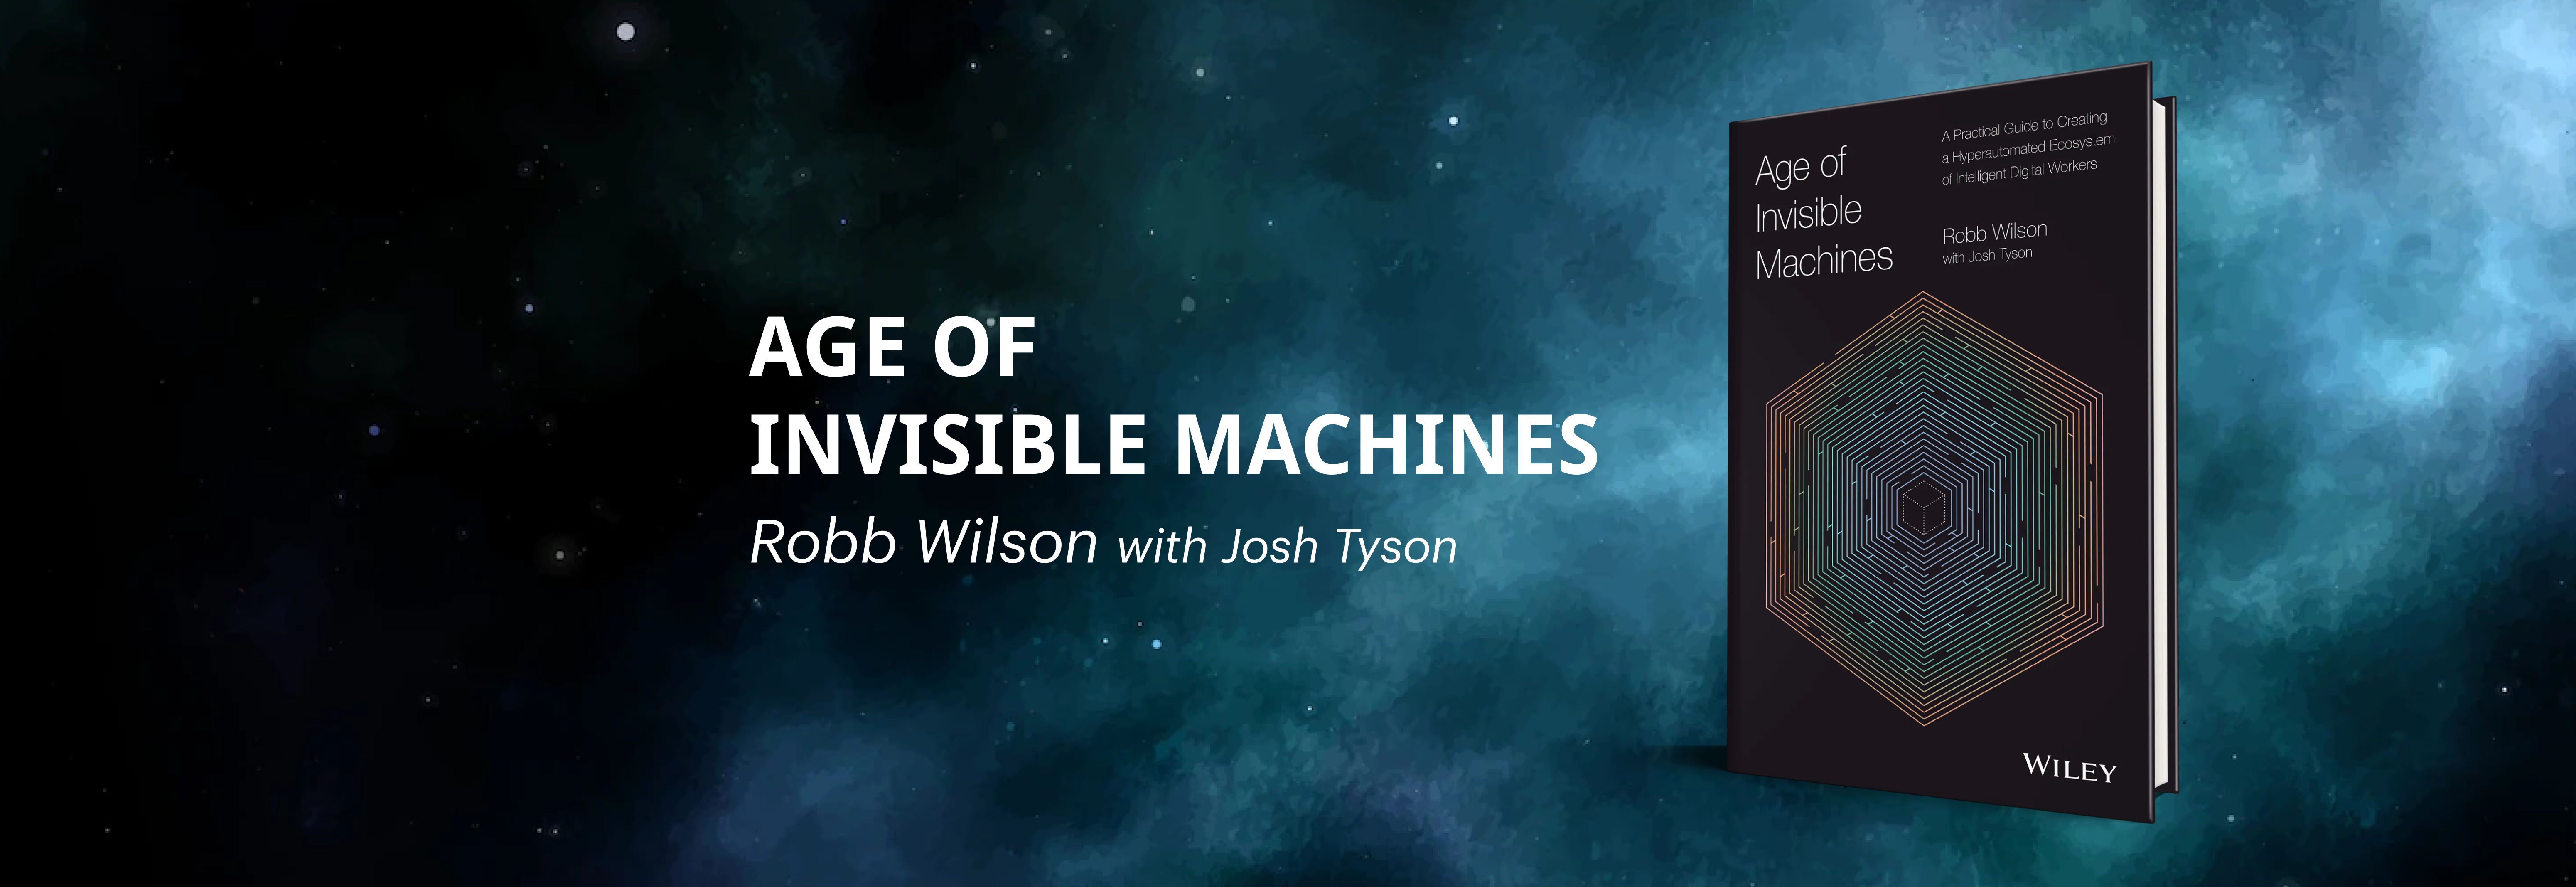 Age of Invisible Machines, by Onereach.ai Founder Robb Wilson Available for Preorder